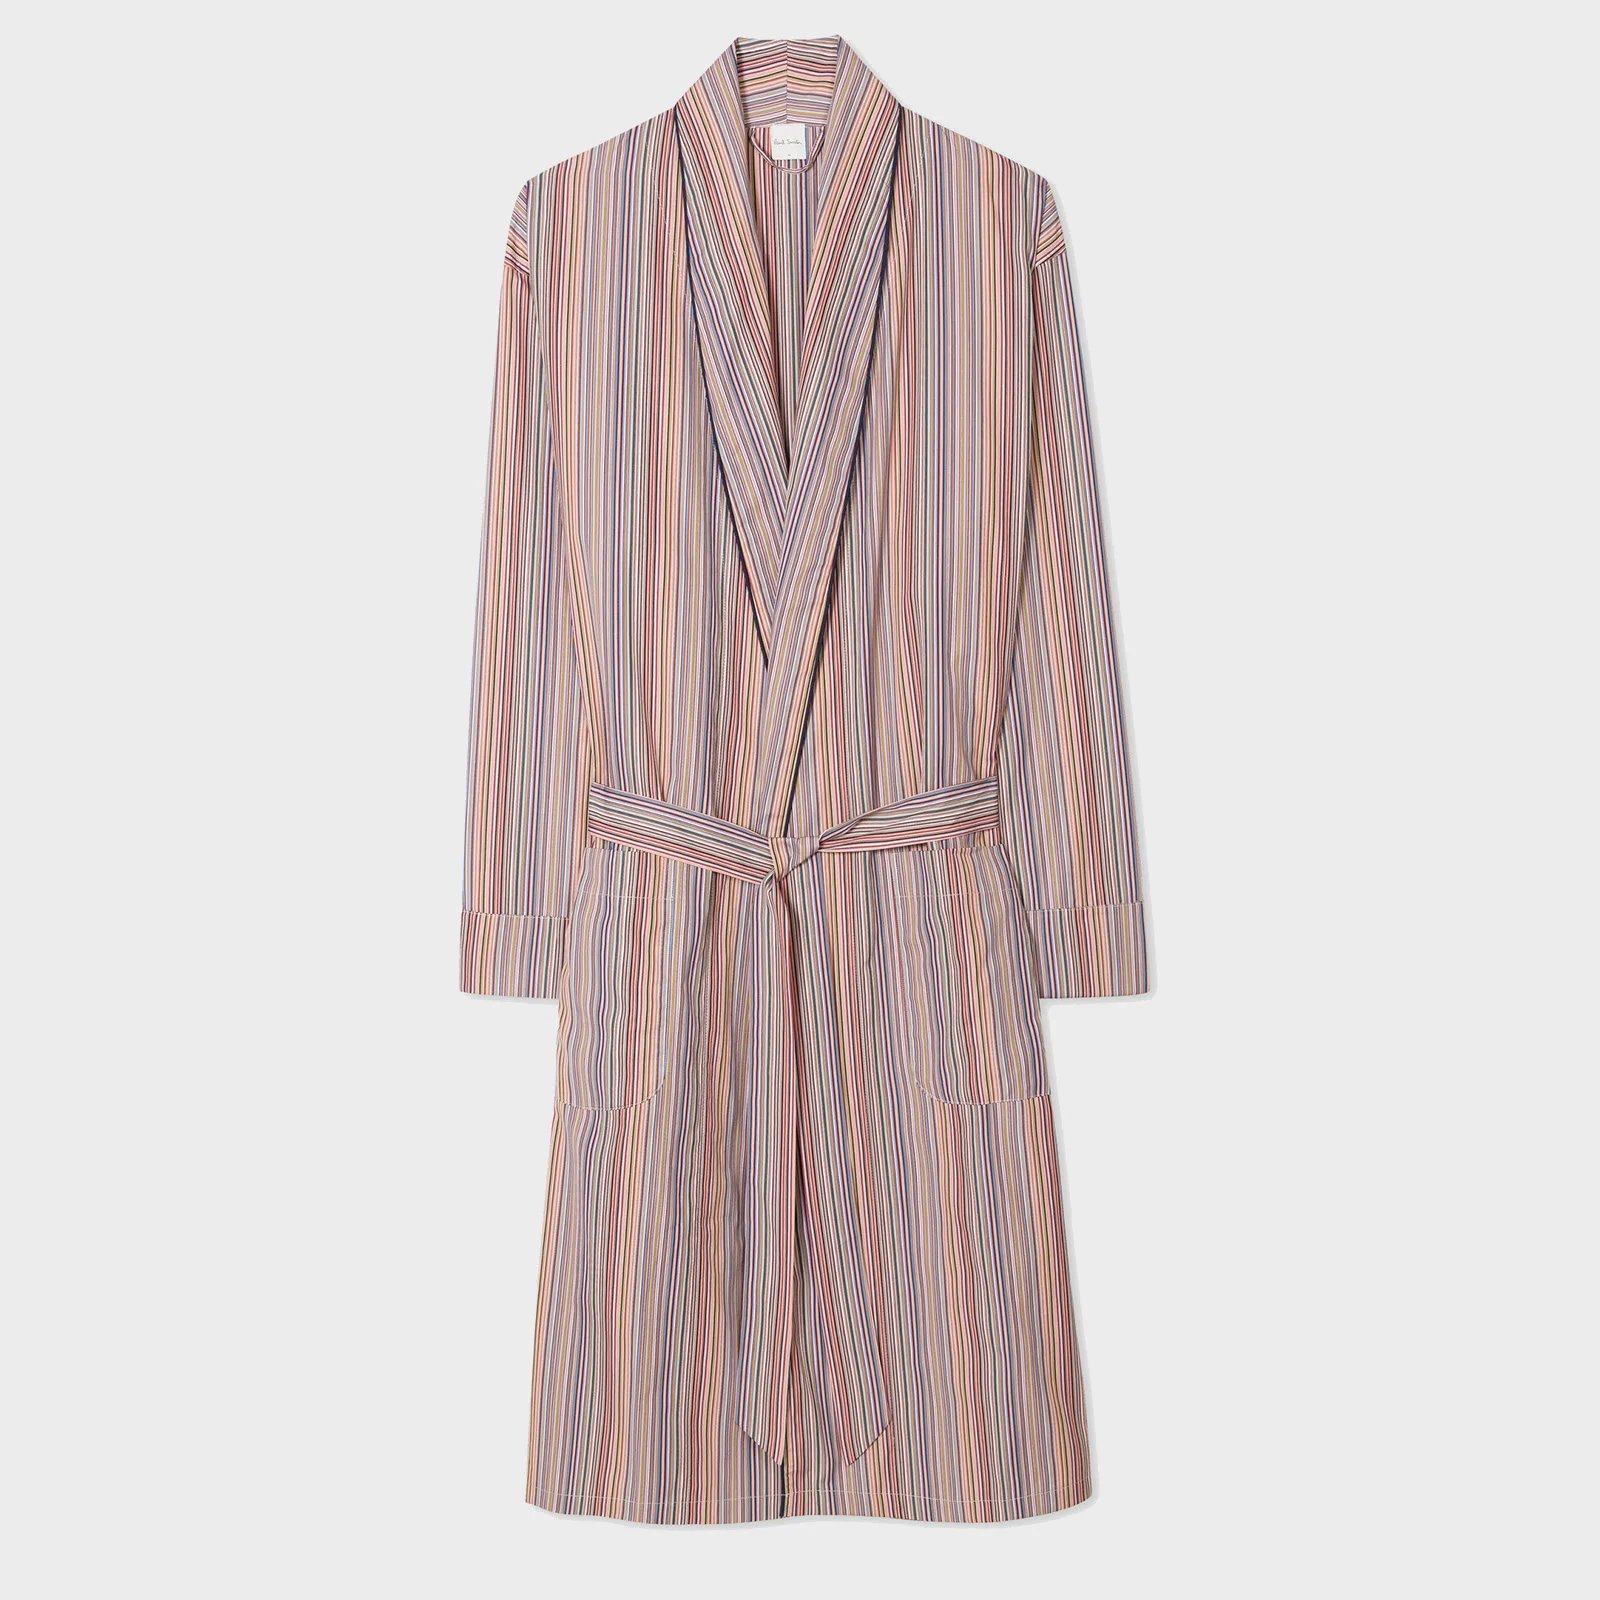 Paul Smith Striped Cotton-Poplin Dressing Gown Image 1